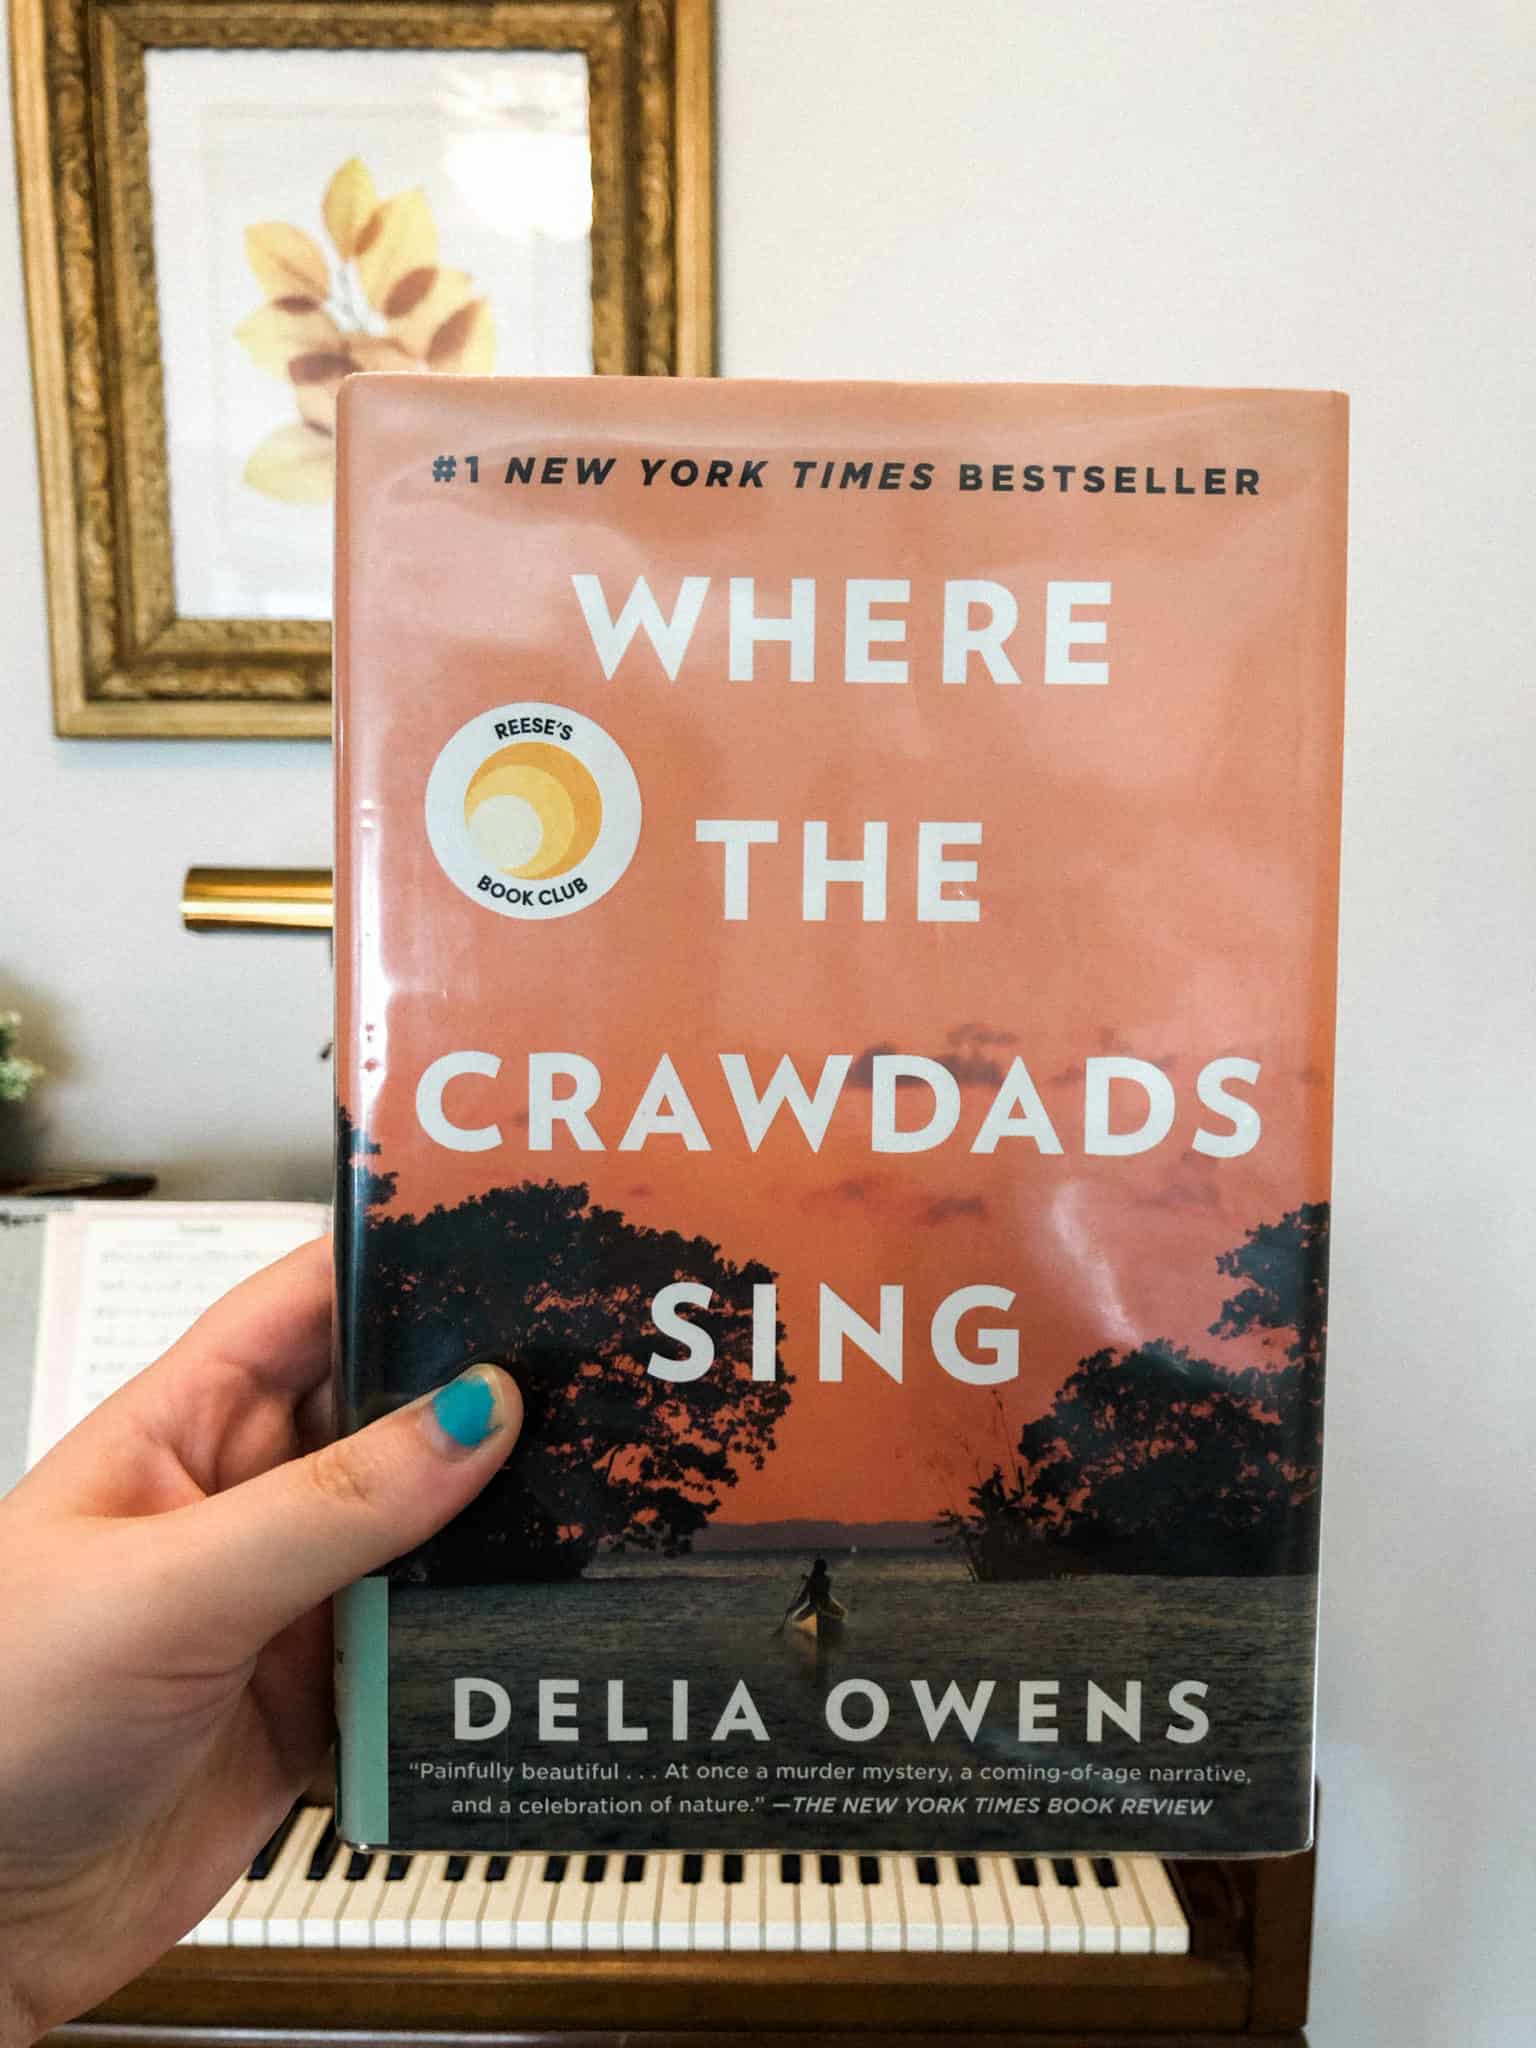 Sharing my opinions and a short review on: Where the Crawdad Sings, Hill Women, Safe People, Cleopatra's Daughter, and Before and After. | via Autumn All Along